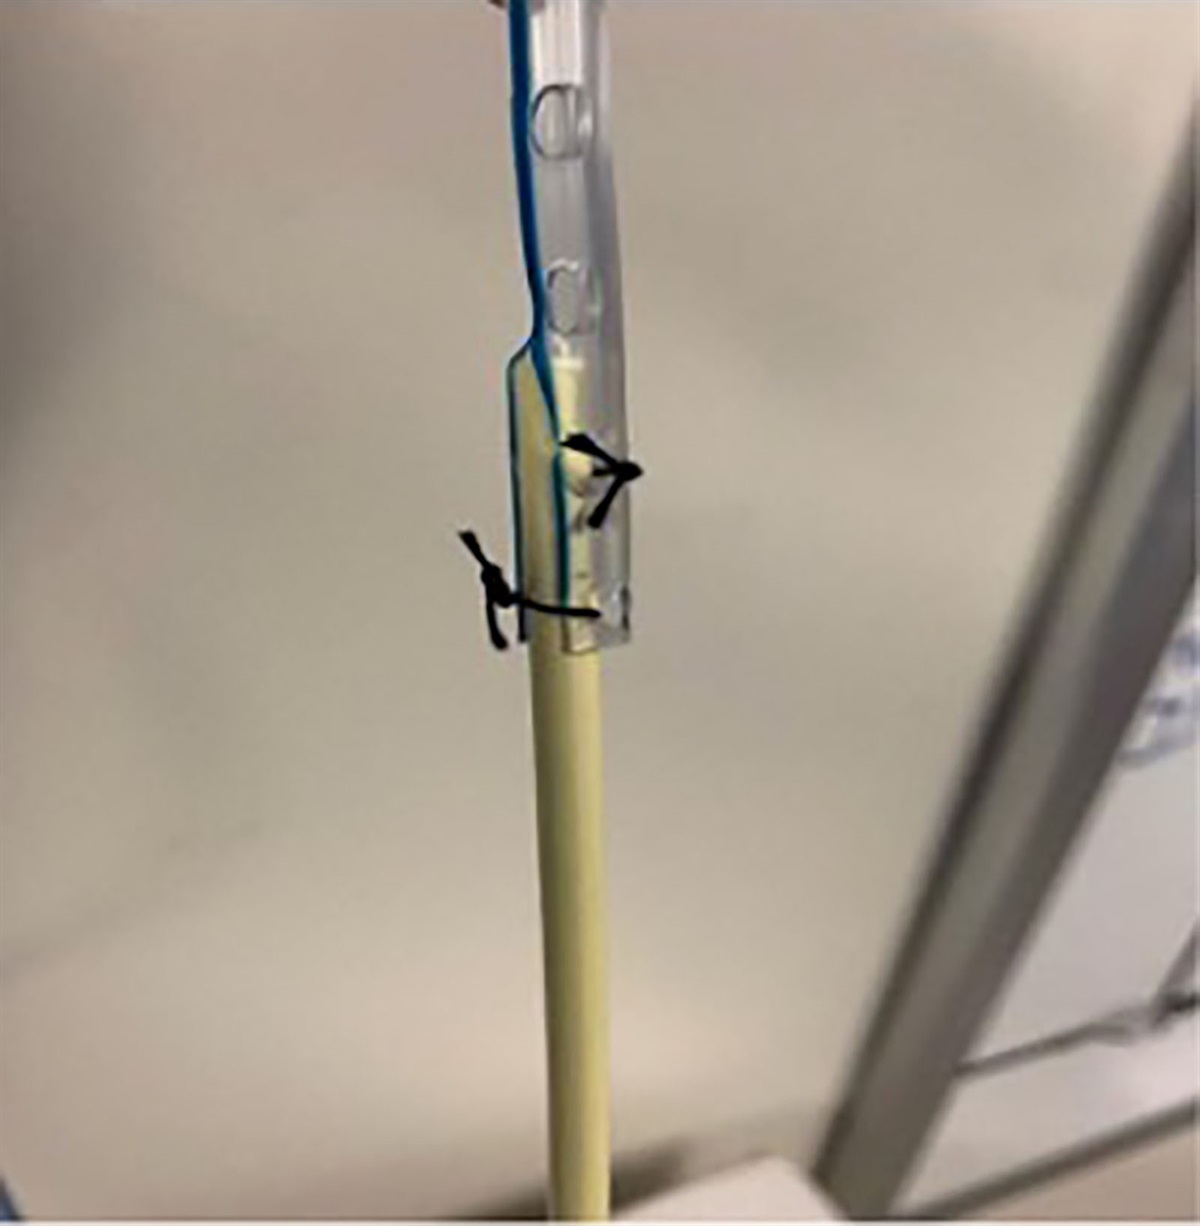 Oral to Nasal Endotracheal Tube Exchange: Modification to Enable Wider Applicability of an “Old Connector” Technique—A Case Report